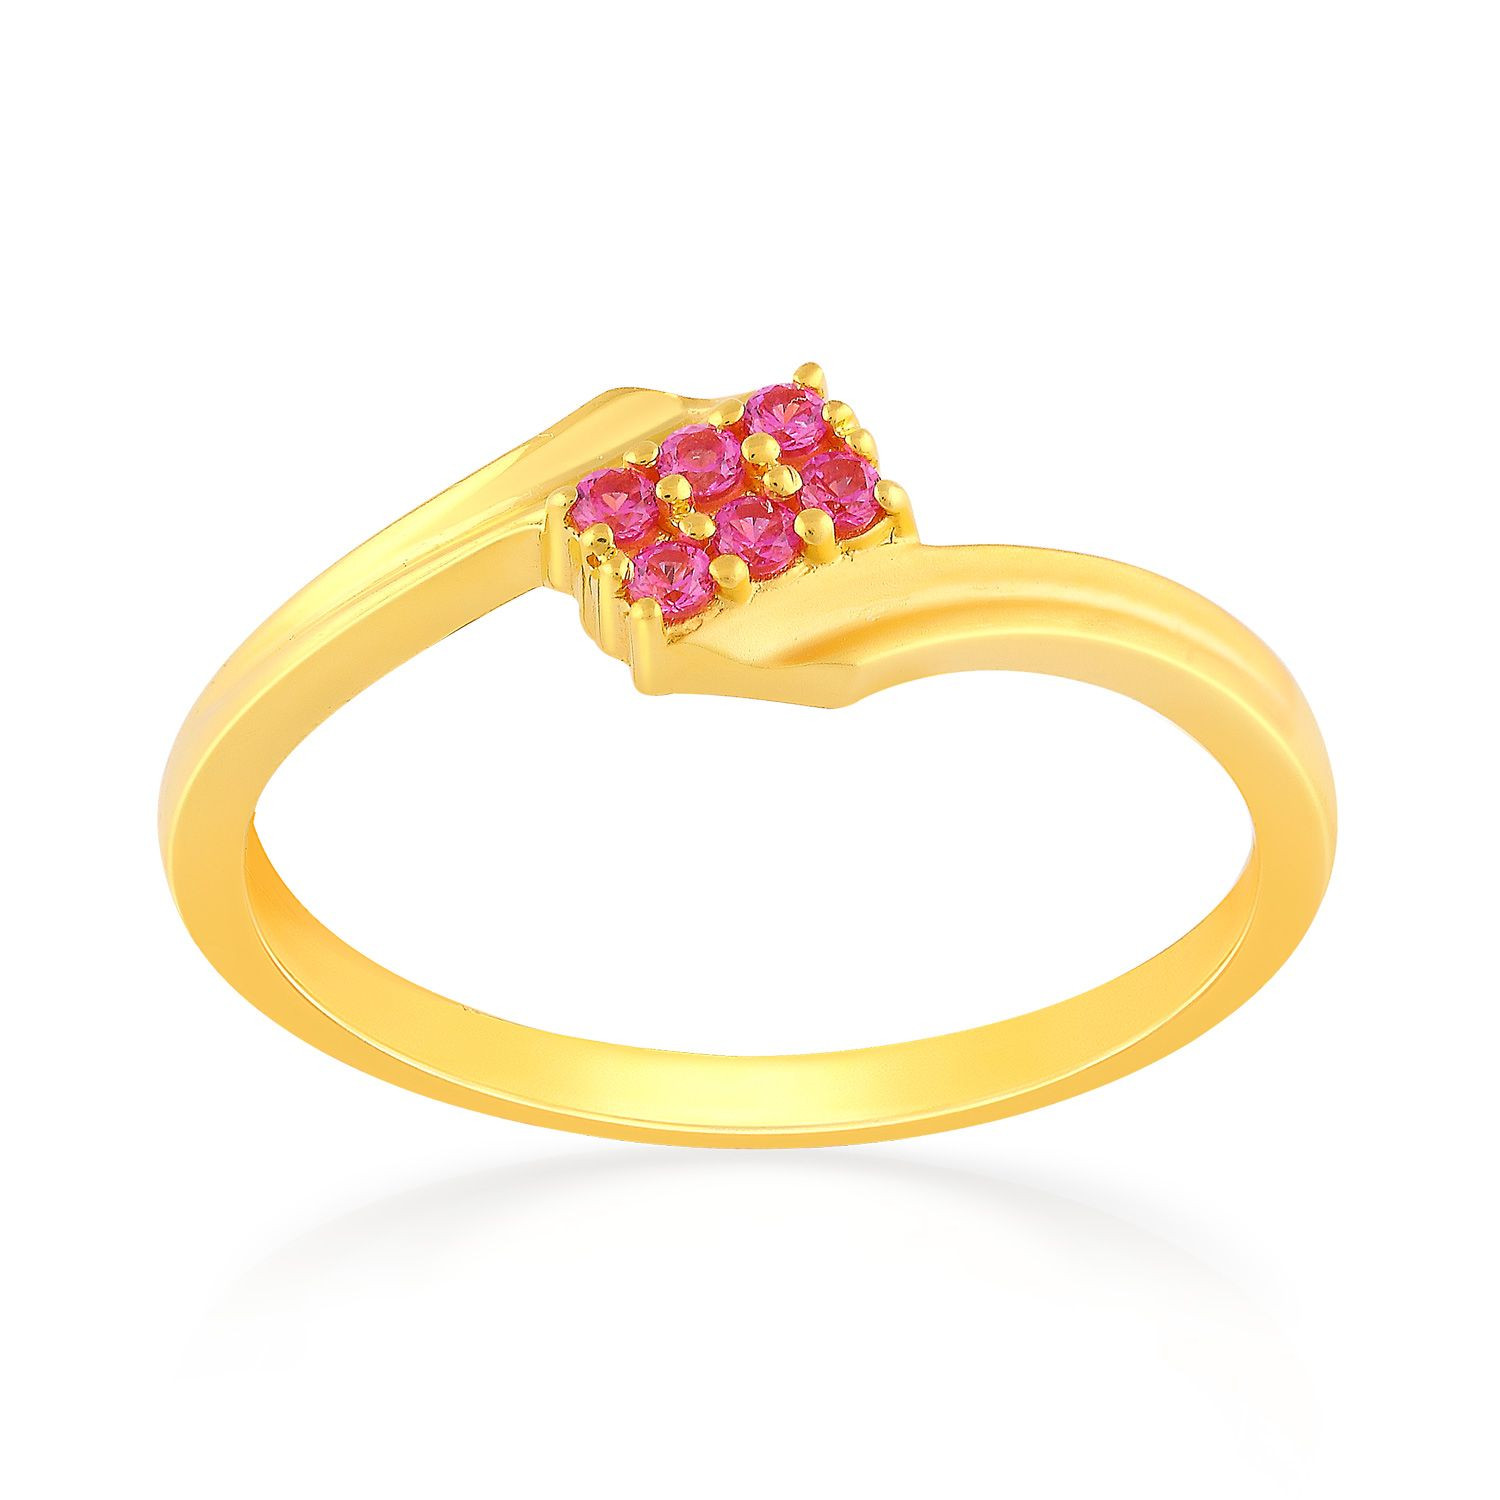 Buy Malabar Gold and Diamonds 22k Gold Floral Ring for Women Online At Best  Price @ Tata CLiQ